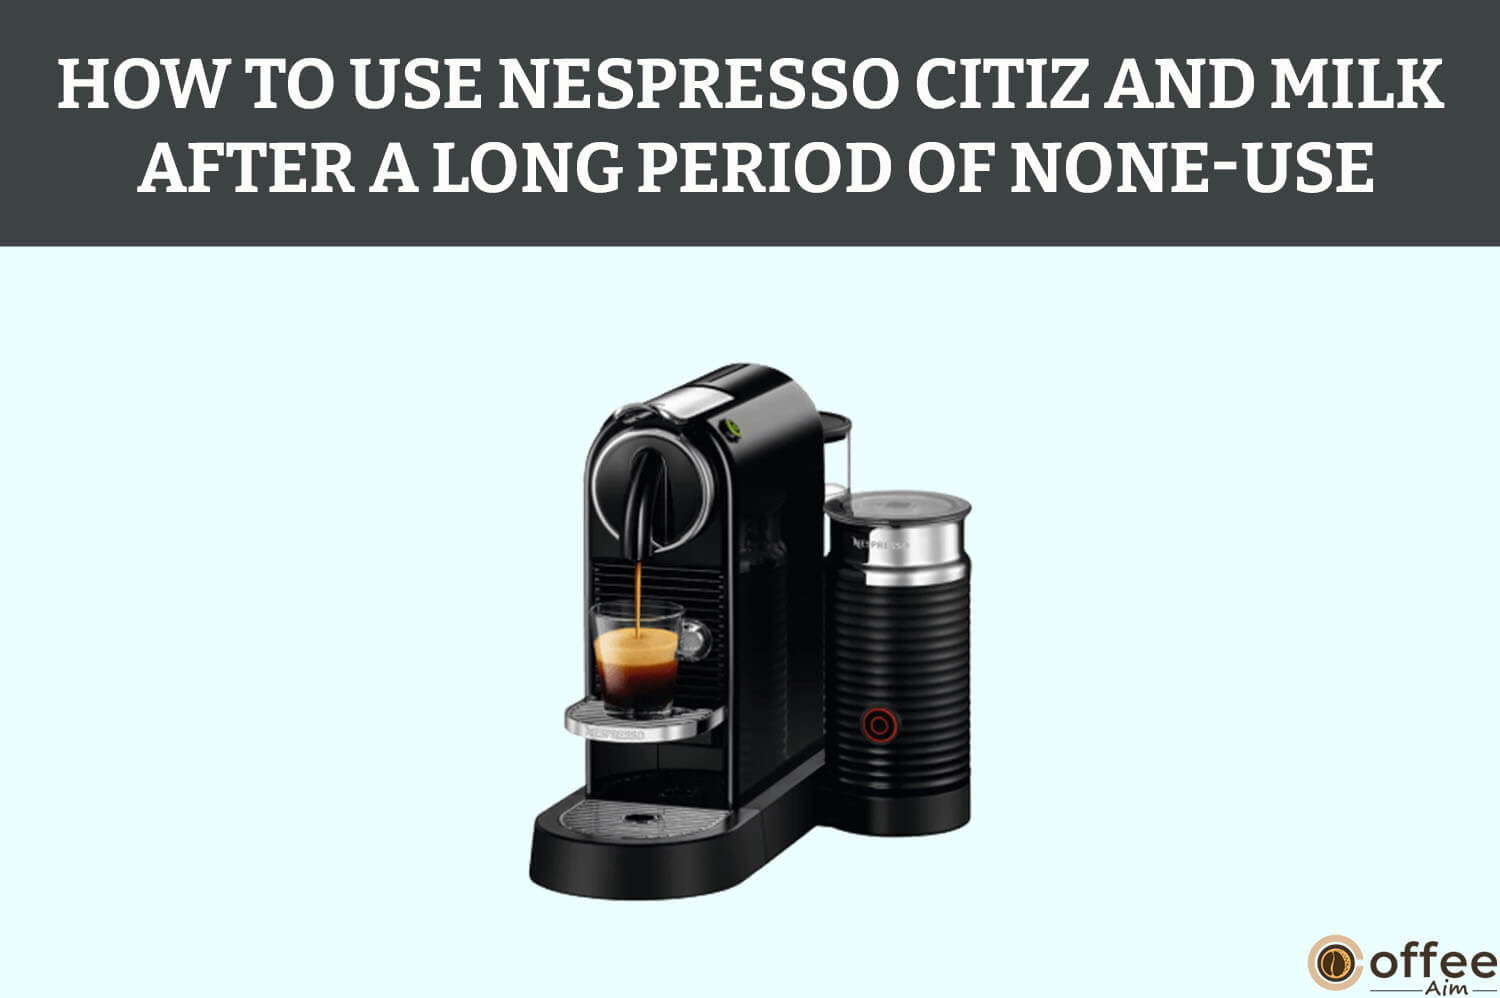 How To Use Nespresso CitiZ And Milk After A Long Period Of None-Use